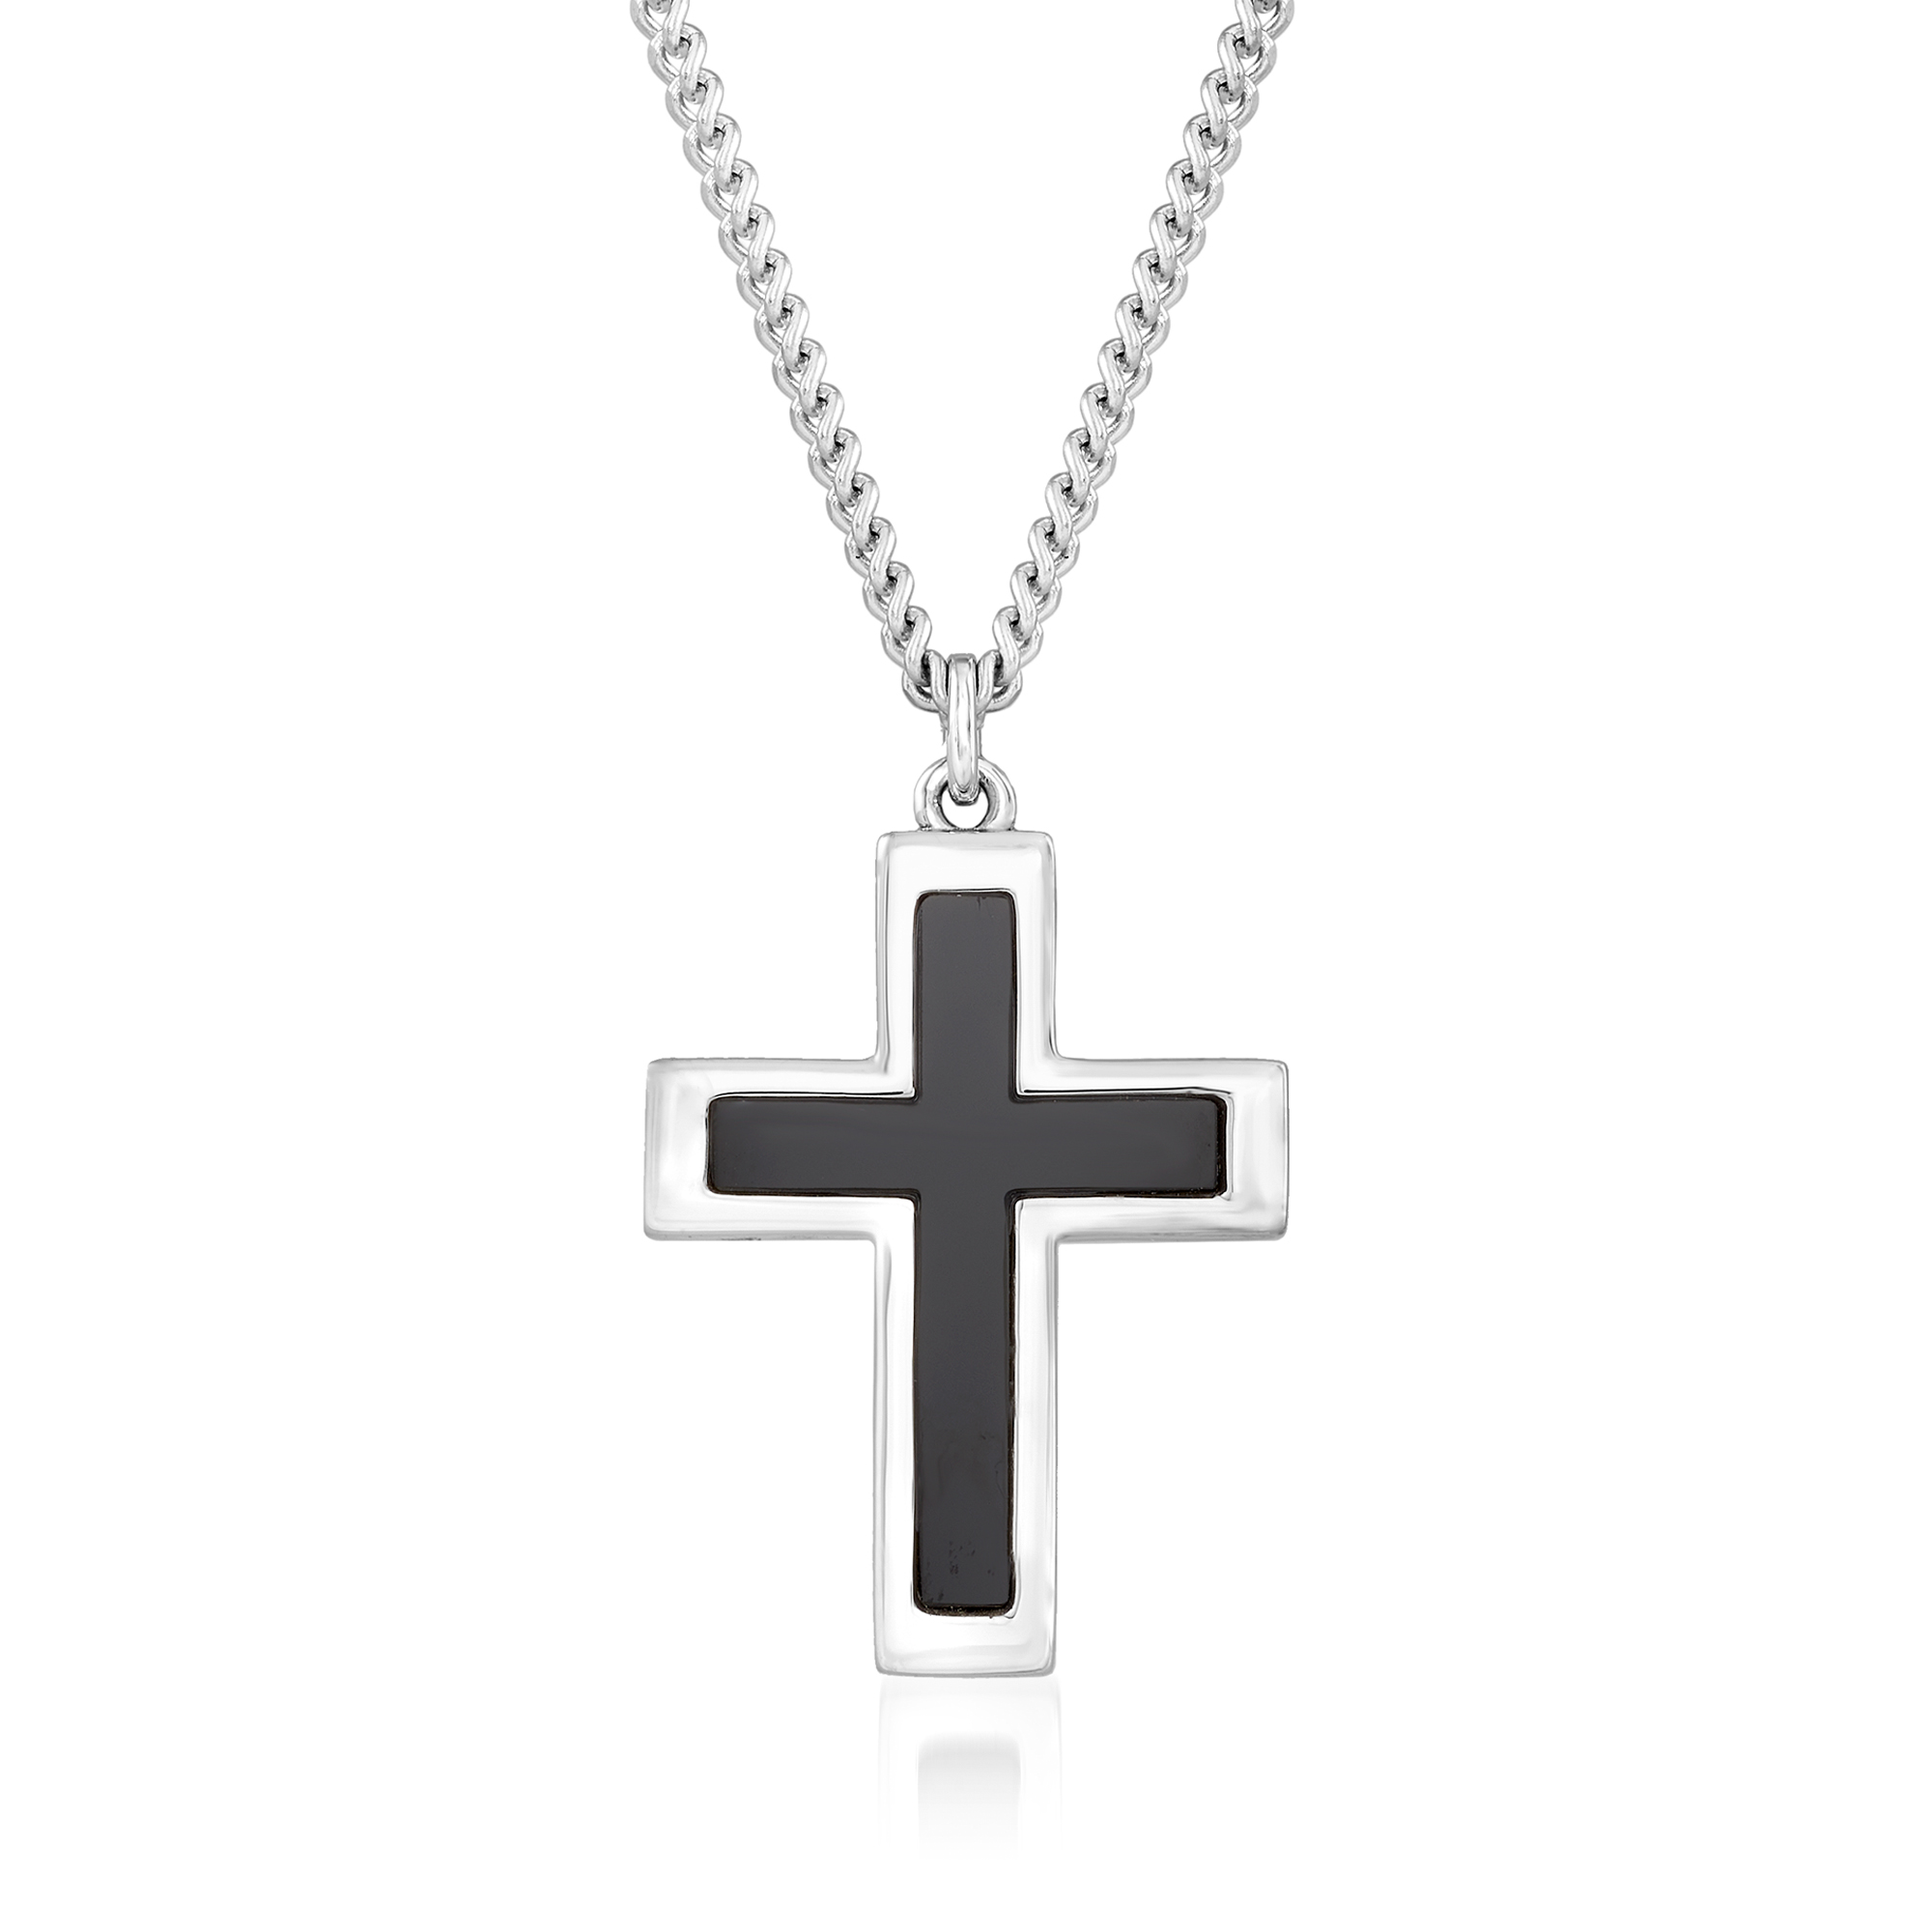 Men's Black Onyx and Sterling Silver Cross Pendant Necklace. 24" |  Ross-Simons